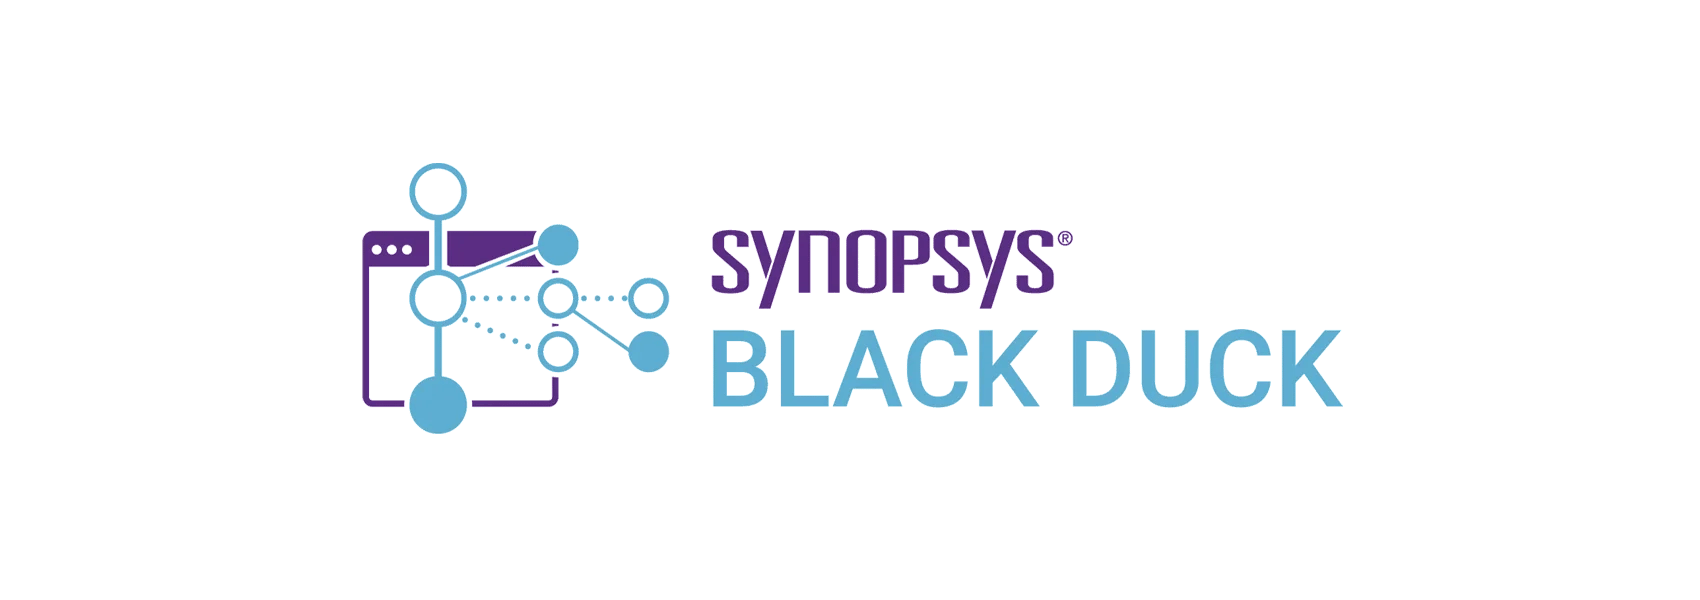 blackduck-by-synopsys-alliance